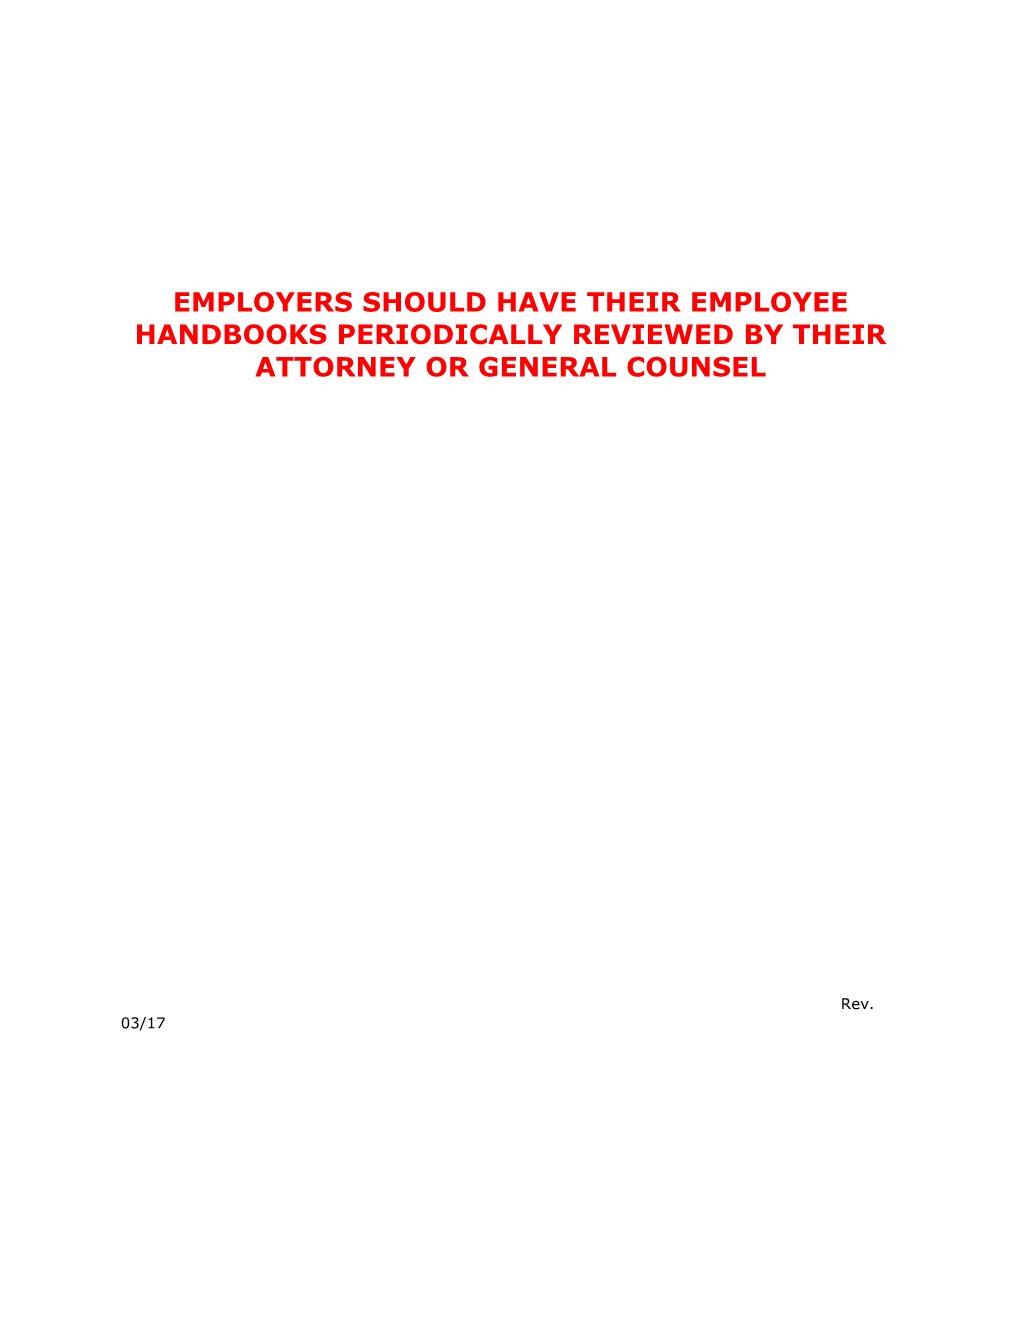 Employers Should Have Their Employee Handbooks Periodically Reviewed by Their Attorney